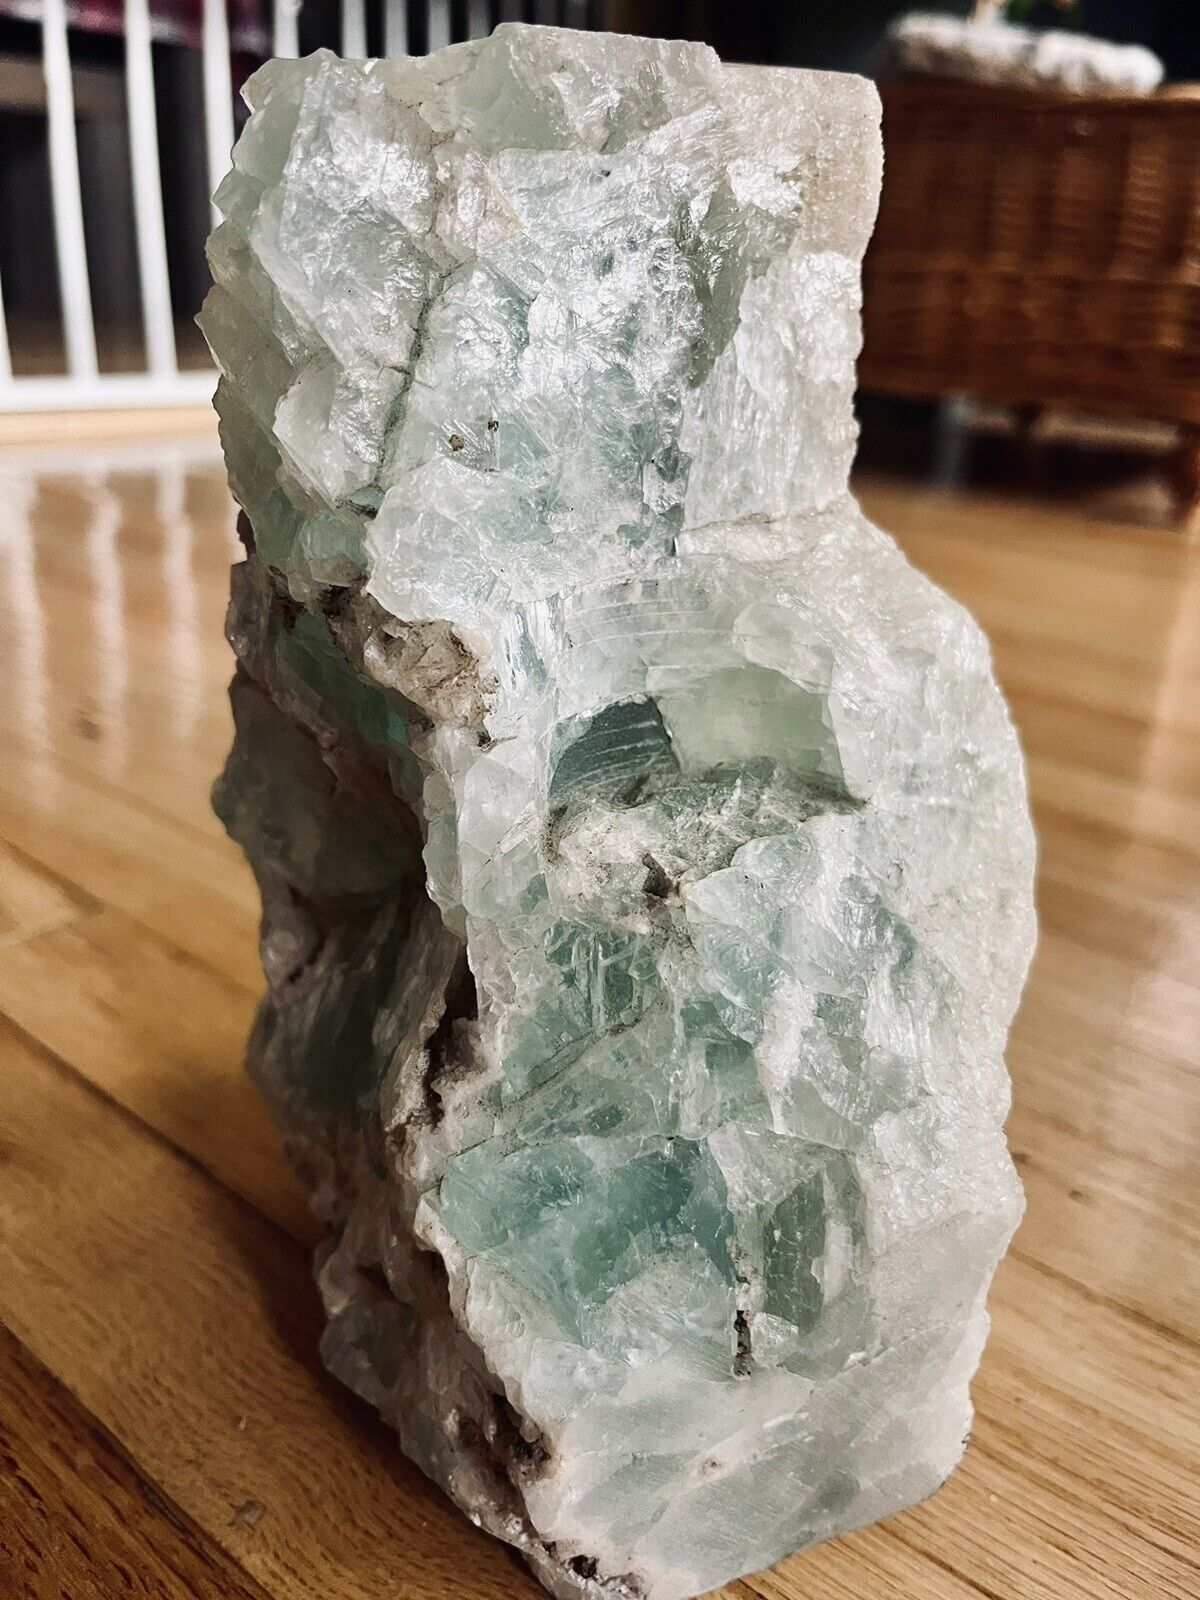 Beautiful Fluorite Crystal, Large, 4.5 Lbs, With Space For Light